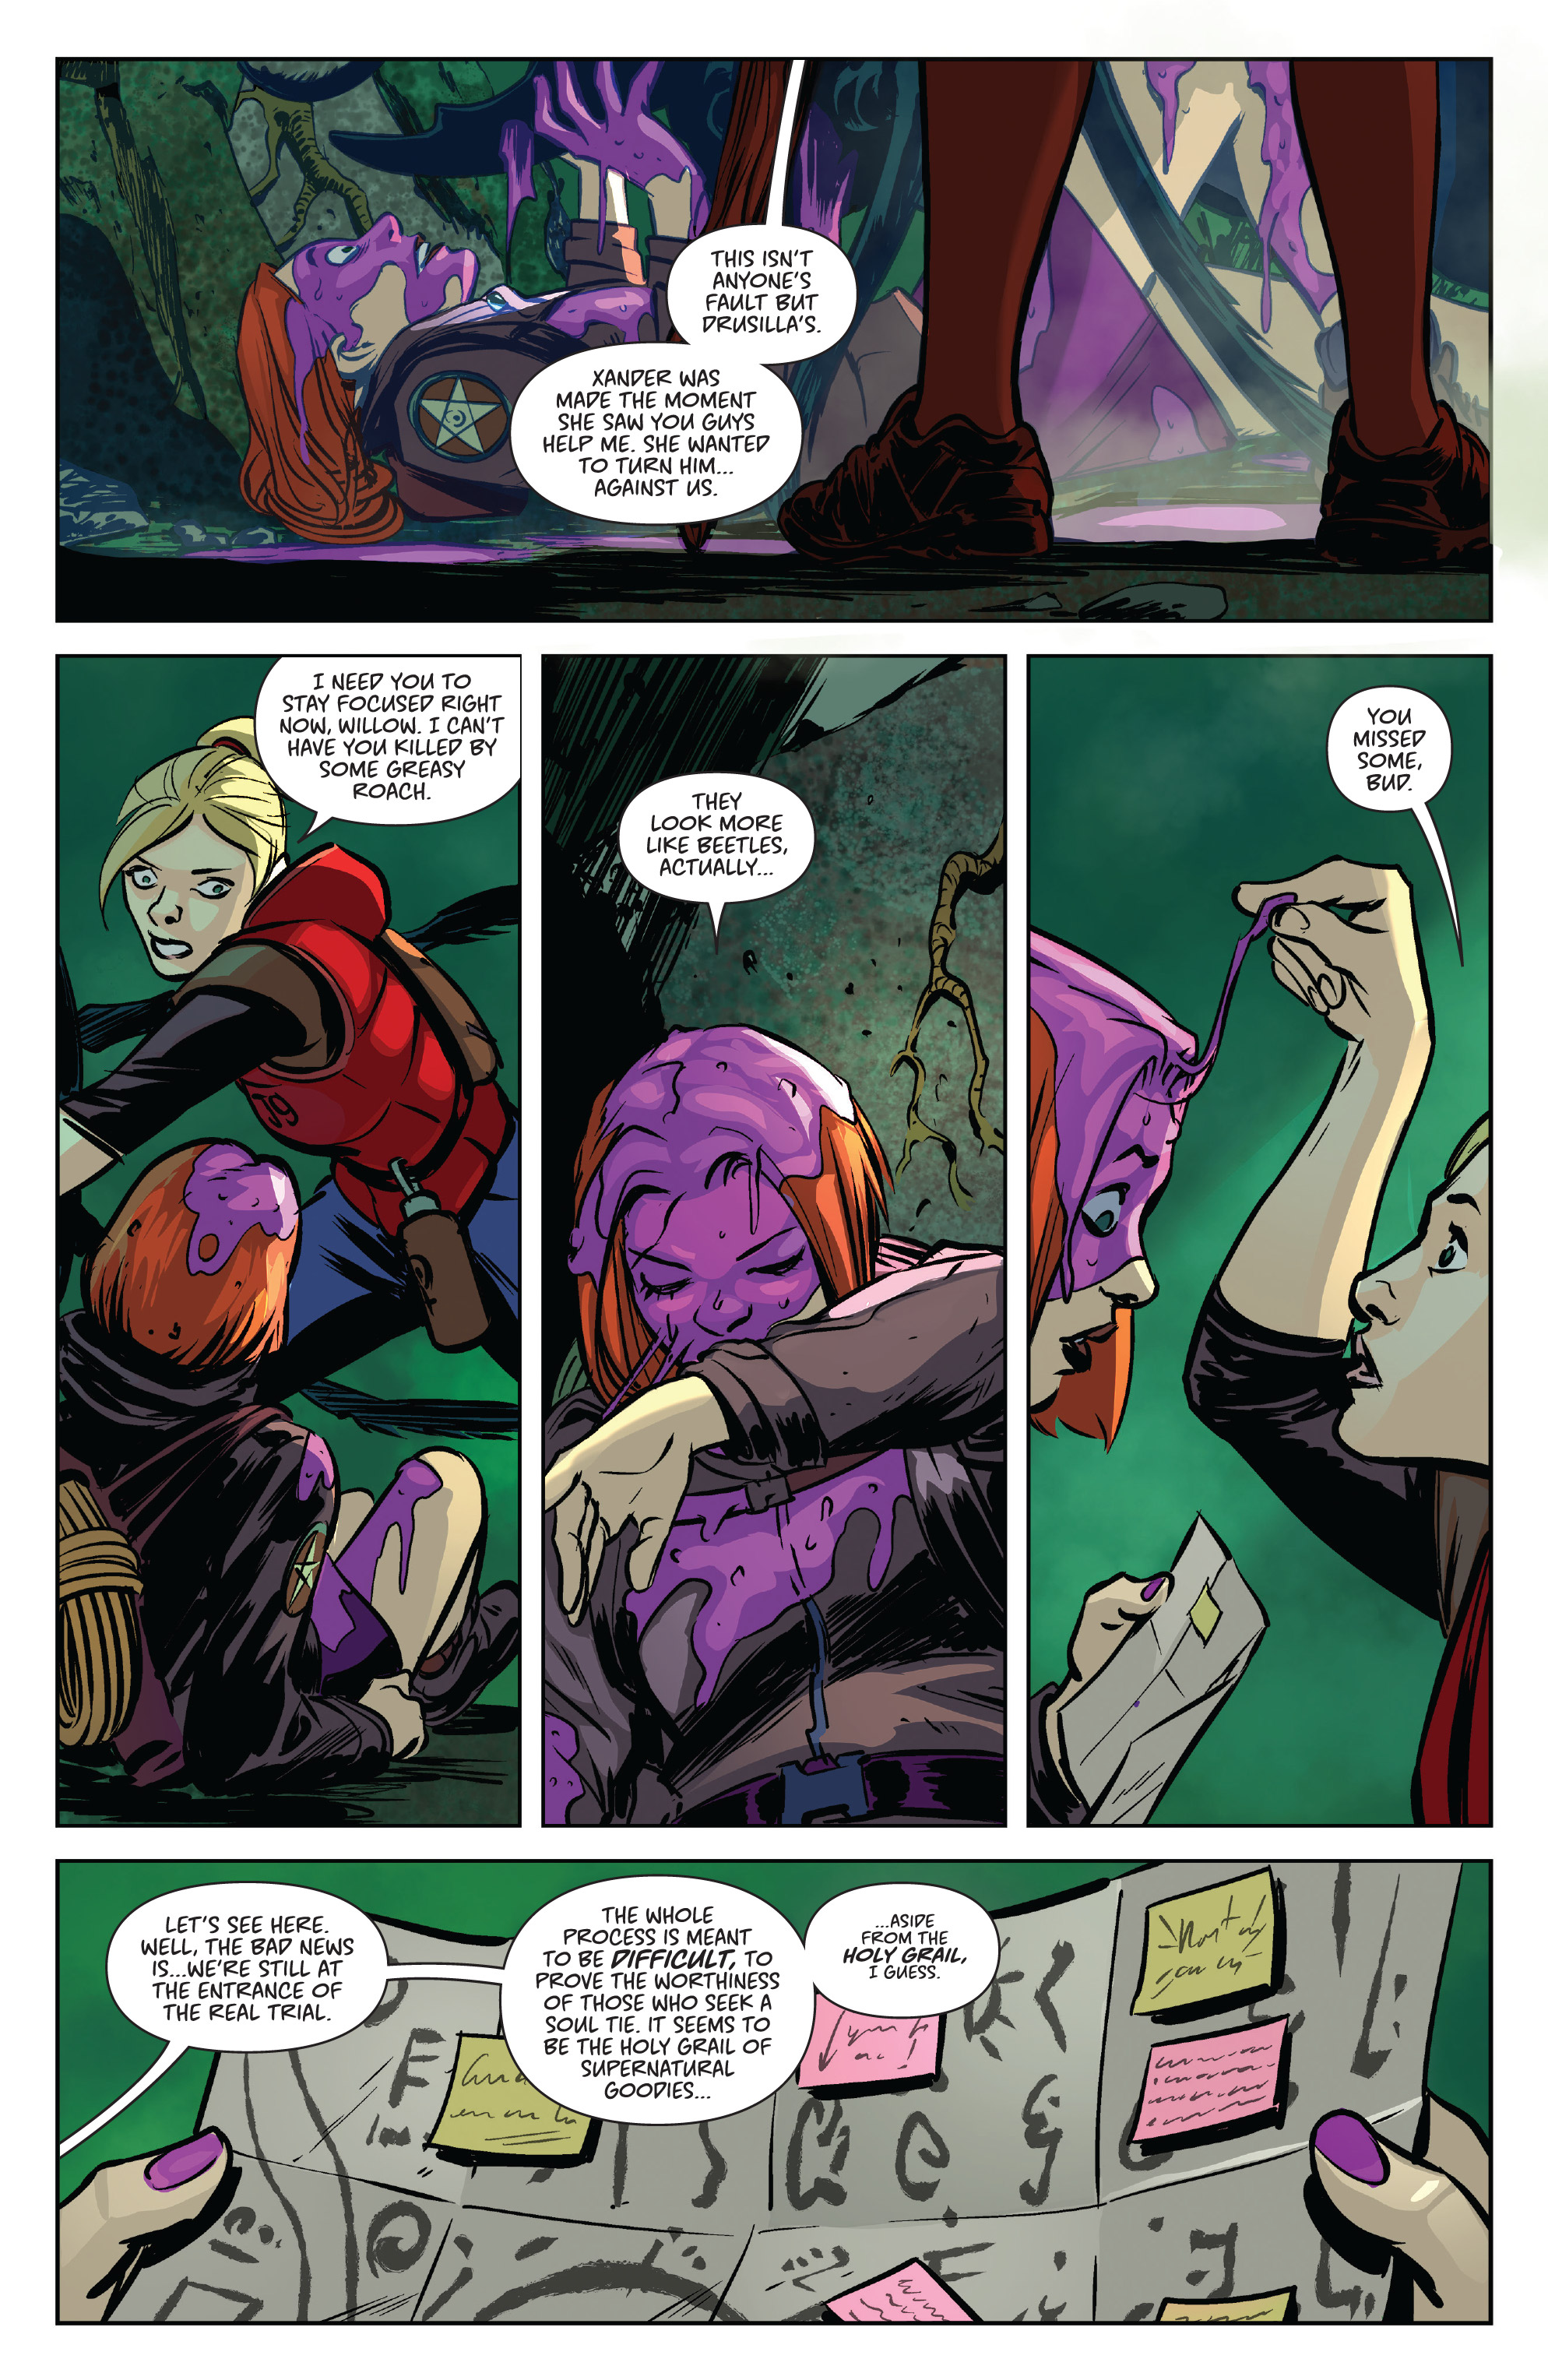 Buffy the Vampire Slayer (2019-): Chapter 6 - Page 4